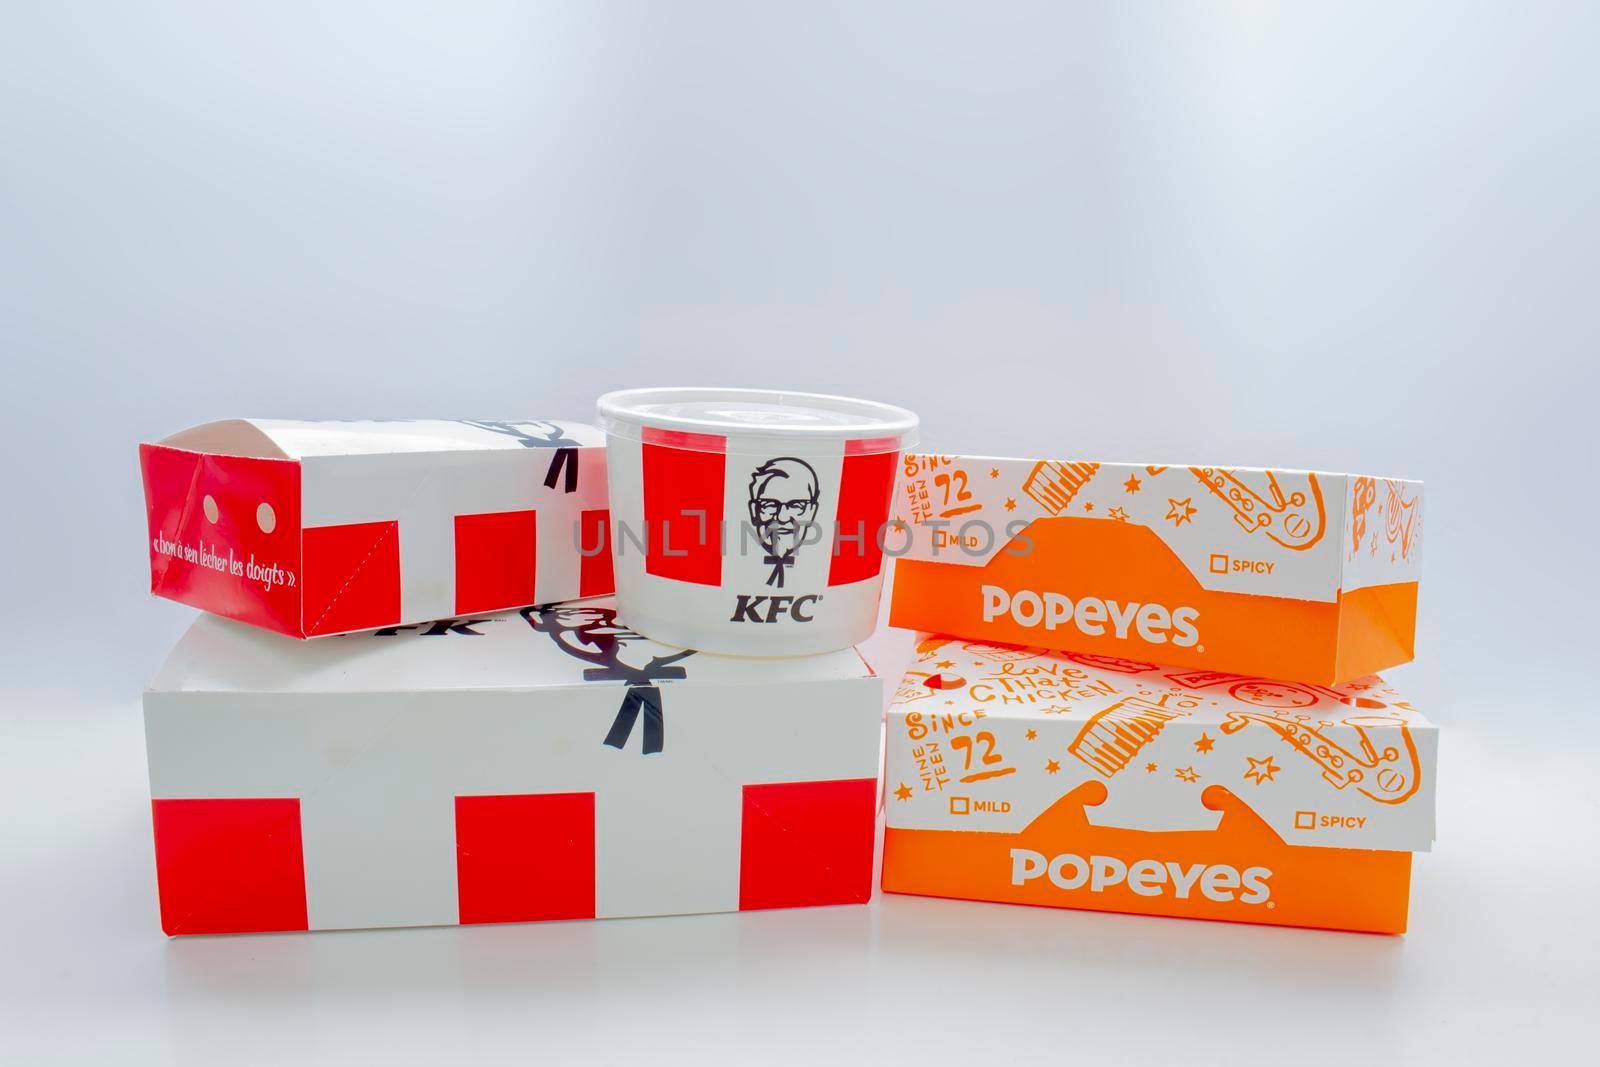 Calgary, Alberta, Canada. May 5, 2021. KFC and Popeyes Fast food boxes on a clear background. by oasisamuel